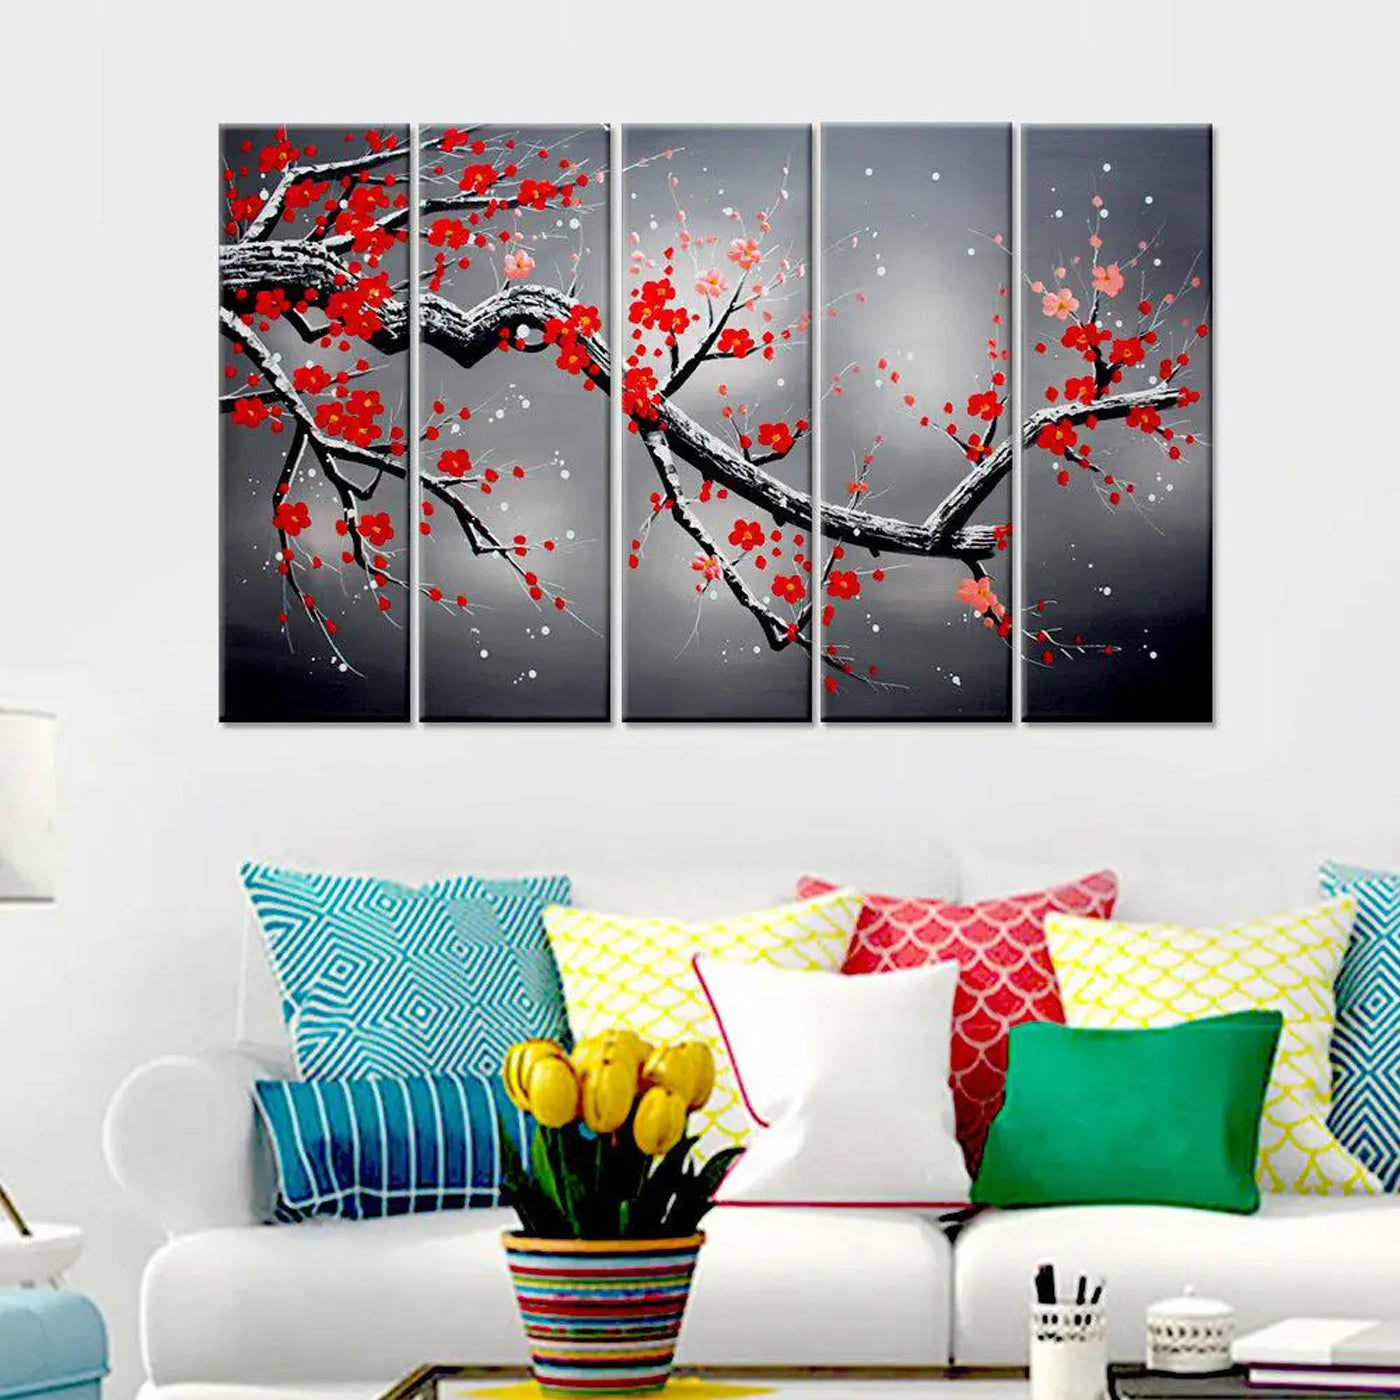 Cherry Blossom Canvas Wall Art | Natural Confetti | wall hanging